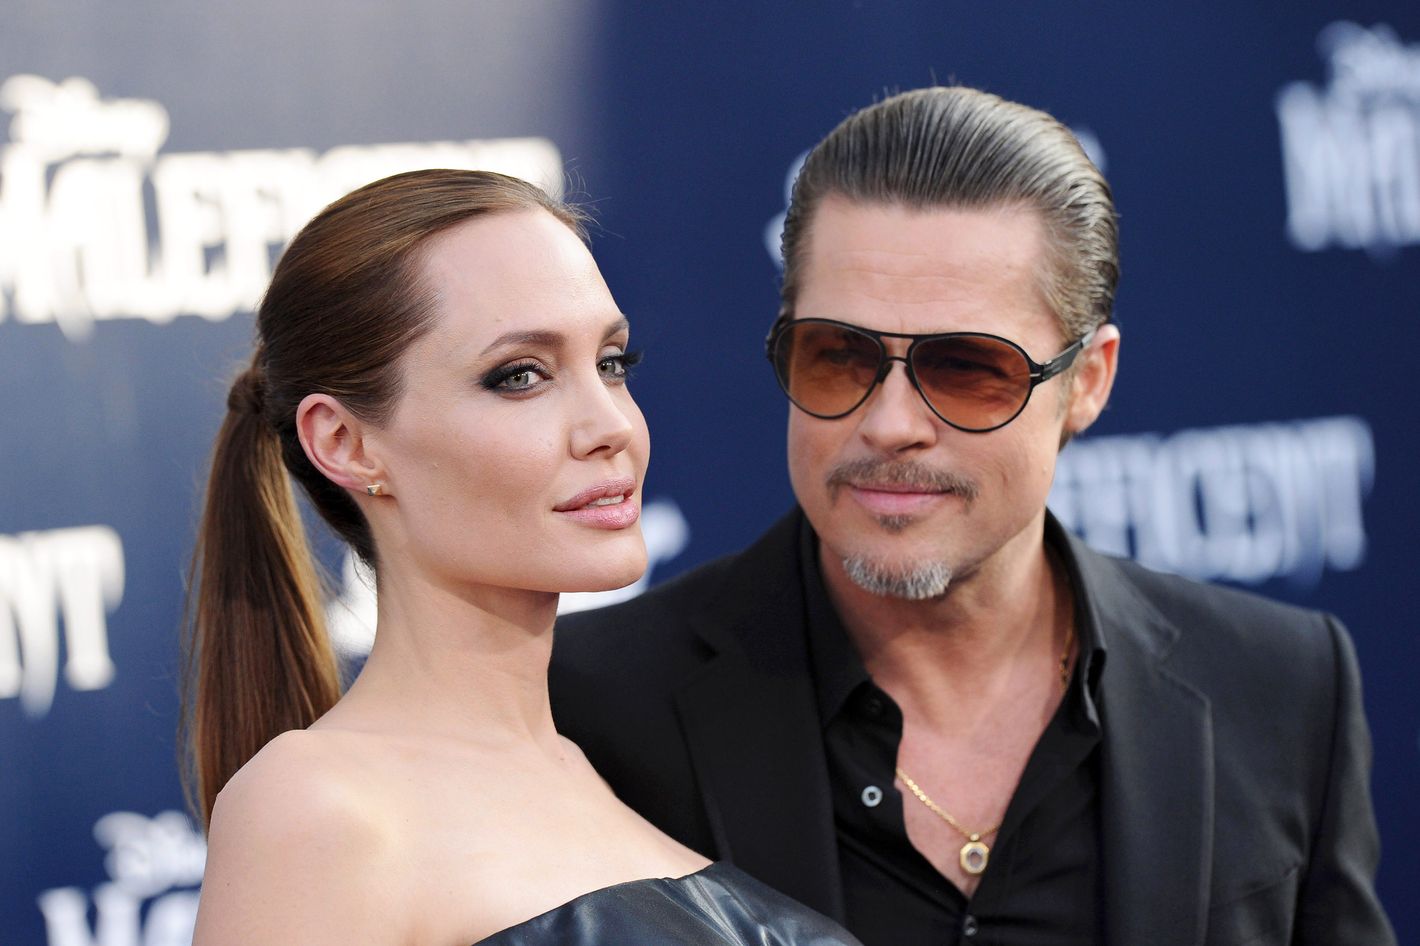 Every Theory About the Brad Pitt-Angelina Jolie Divorce1420 x 942